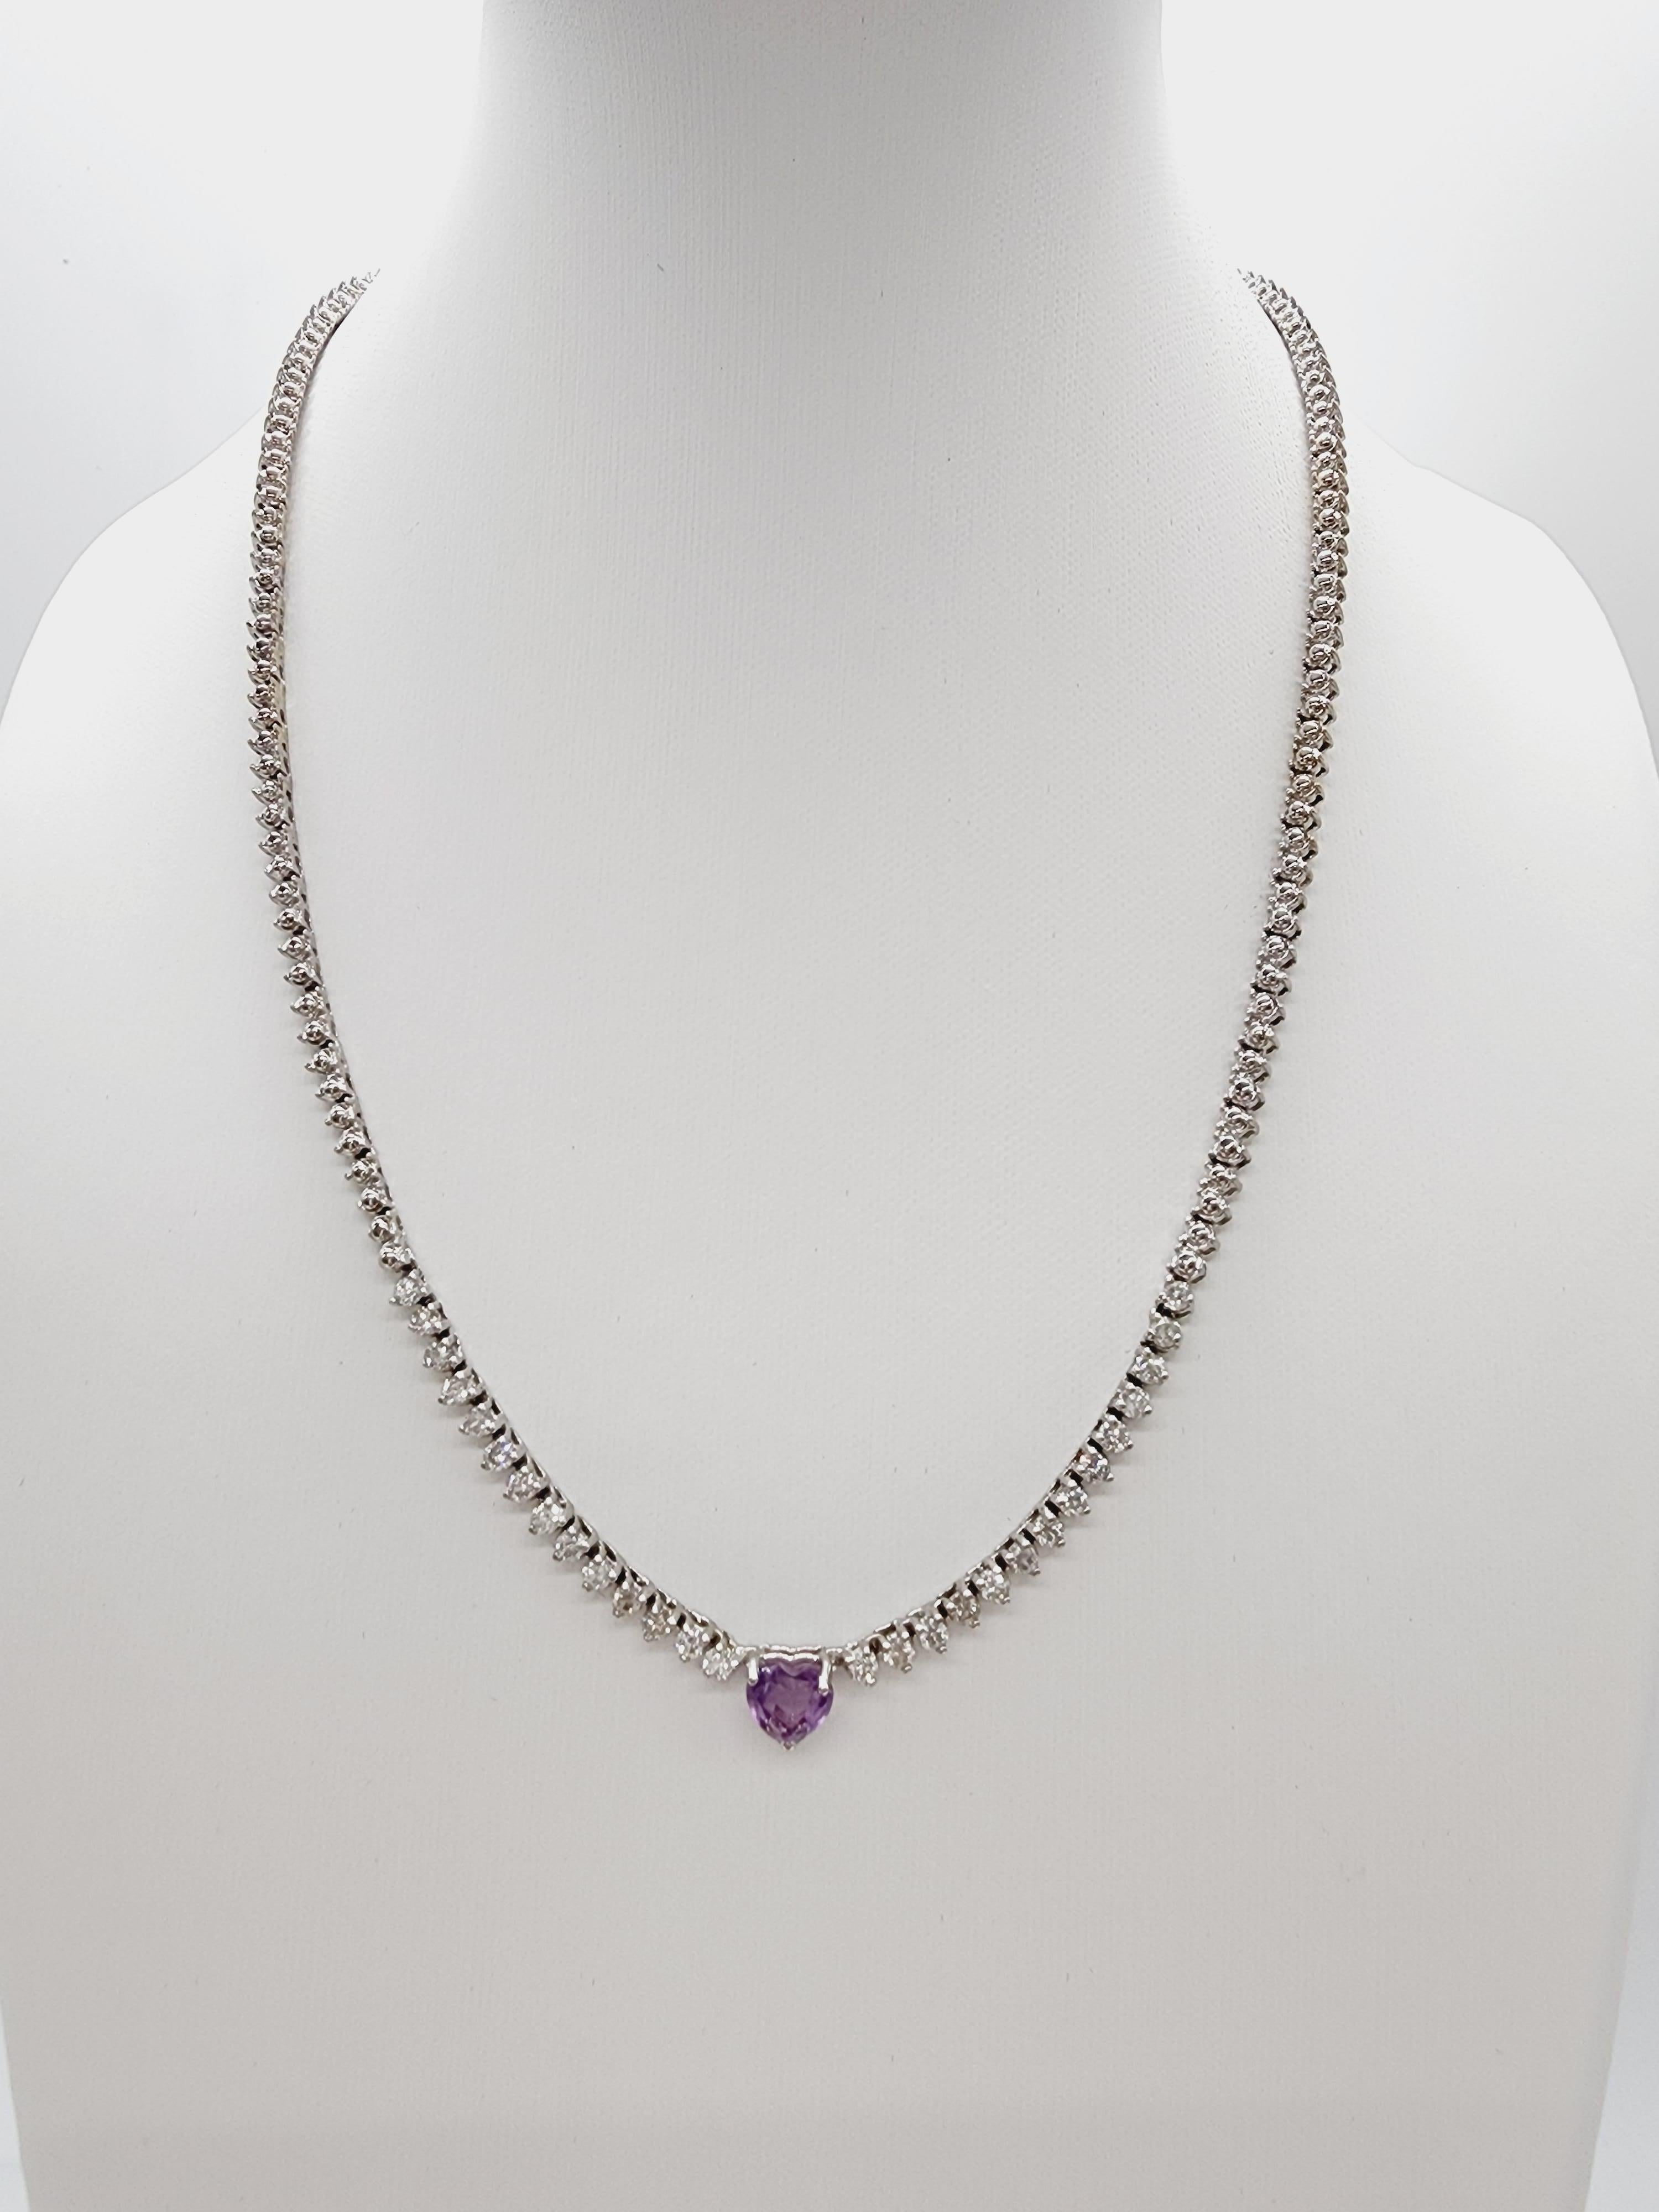 Heart Shape Amethyst Natural Diamond Necklace 14 Karat White Gold Round Brilliant Cut Diamond set on 3 prong setting.  The closure is an insert clasp with safety clasp. Length is 16 inches. Elegance you can wear.

Center Amethyst weight: 0.82